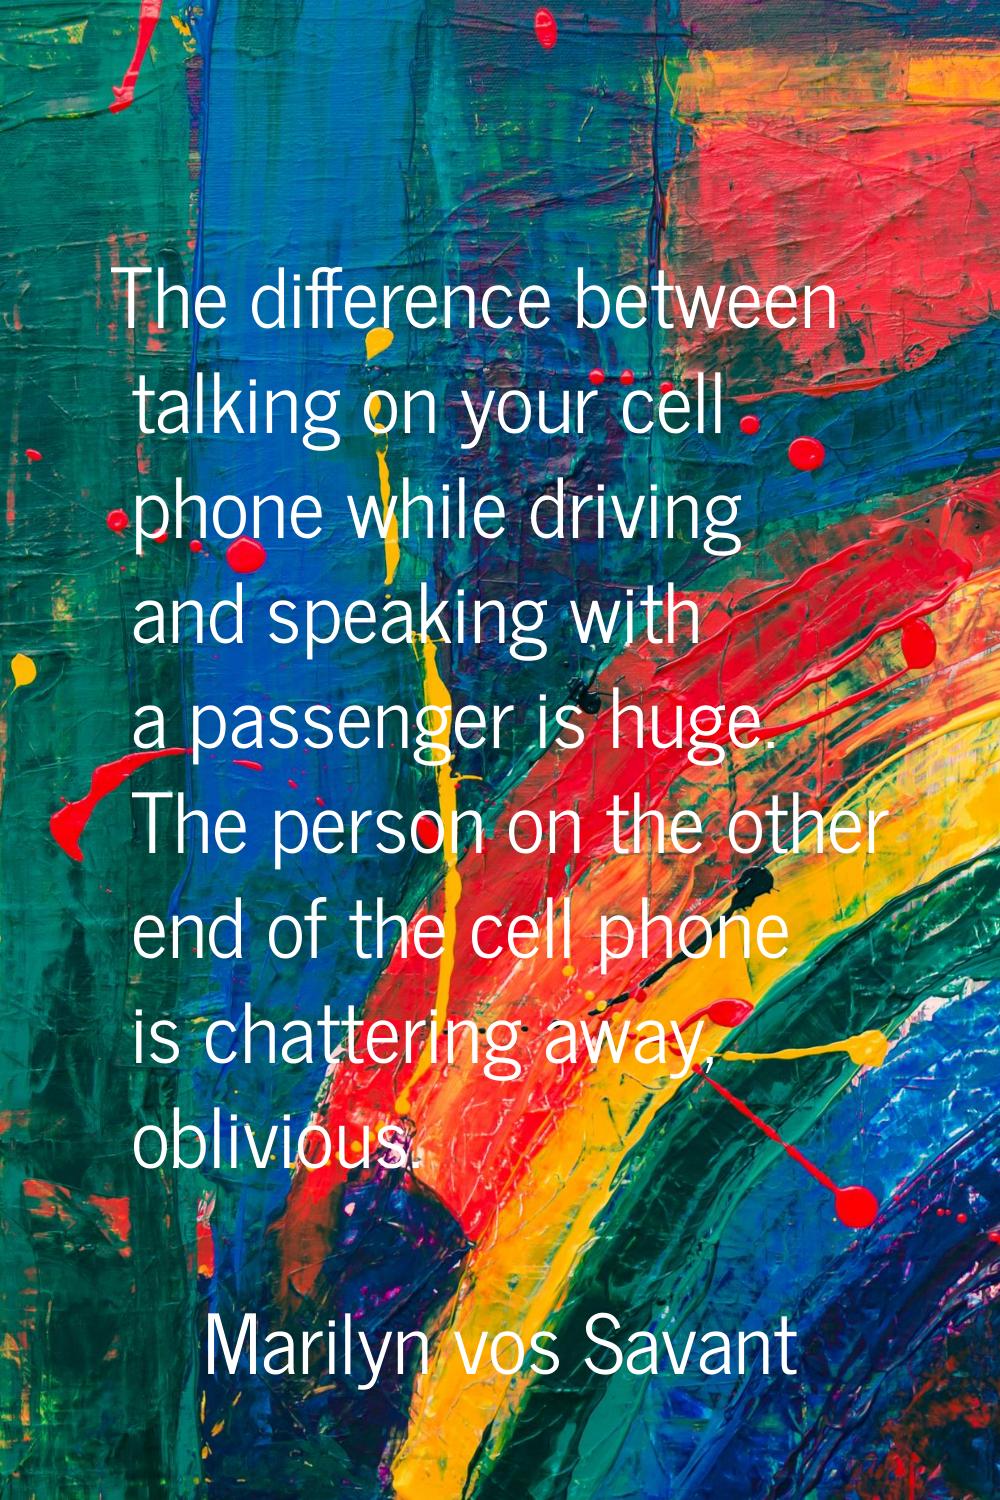 The difference between talking on your cell phone while driving and speaking with a passenger is hu